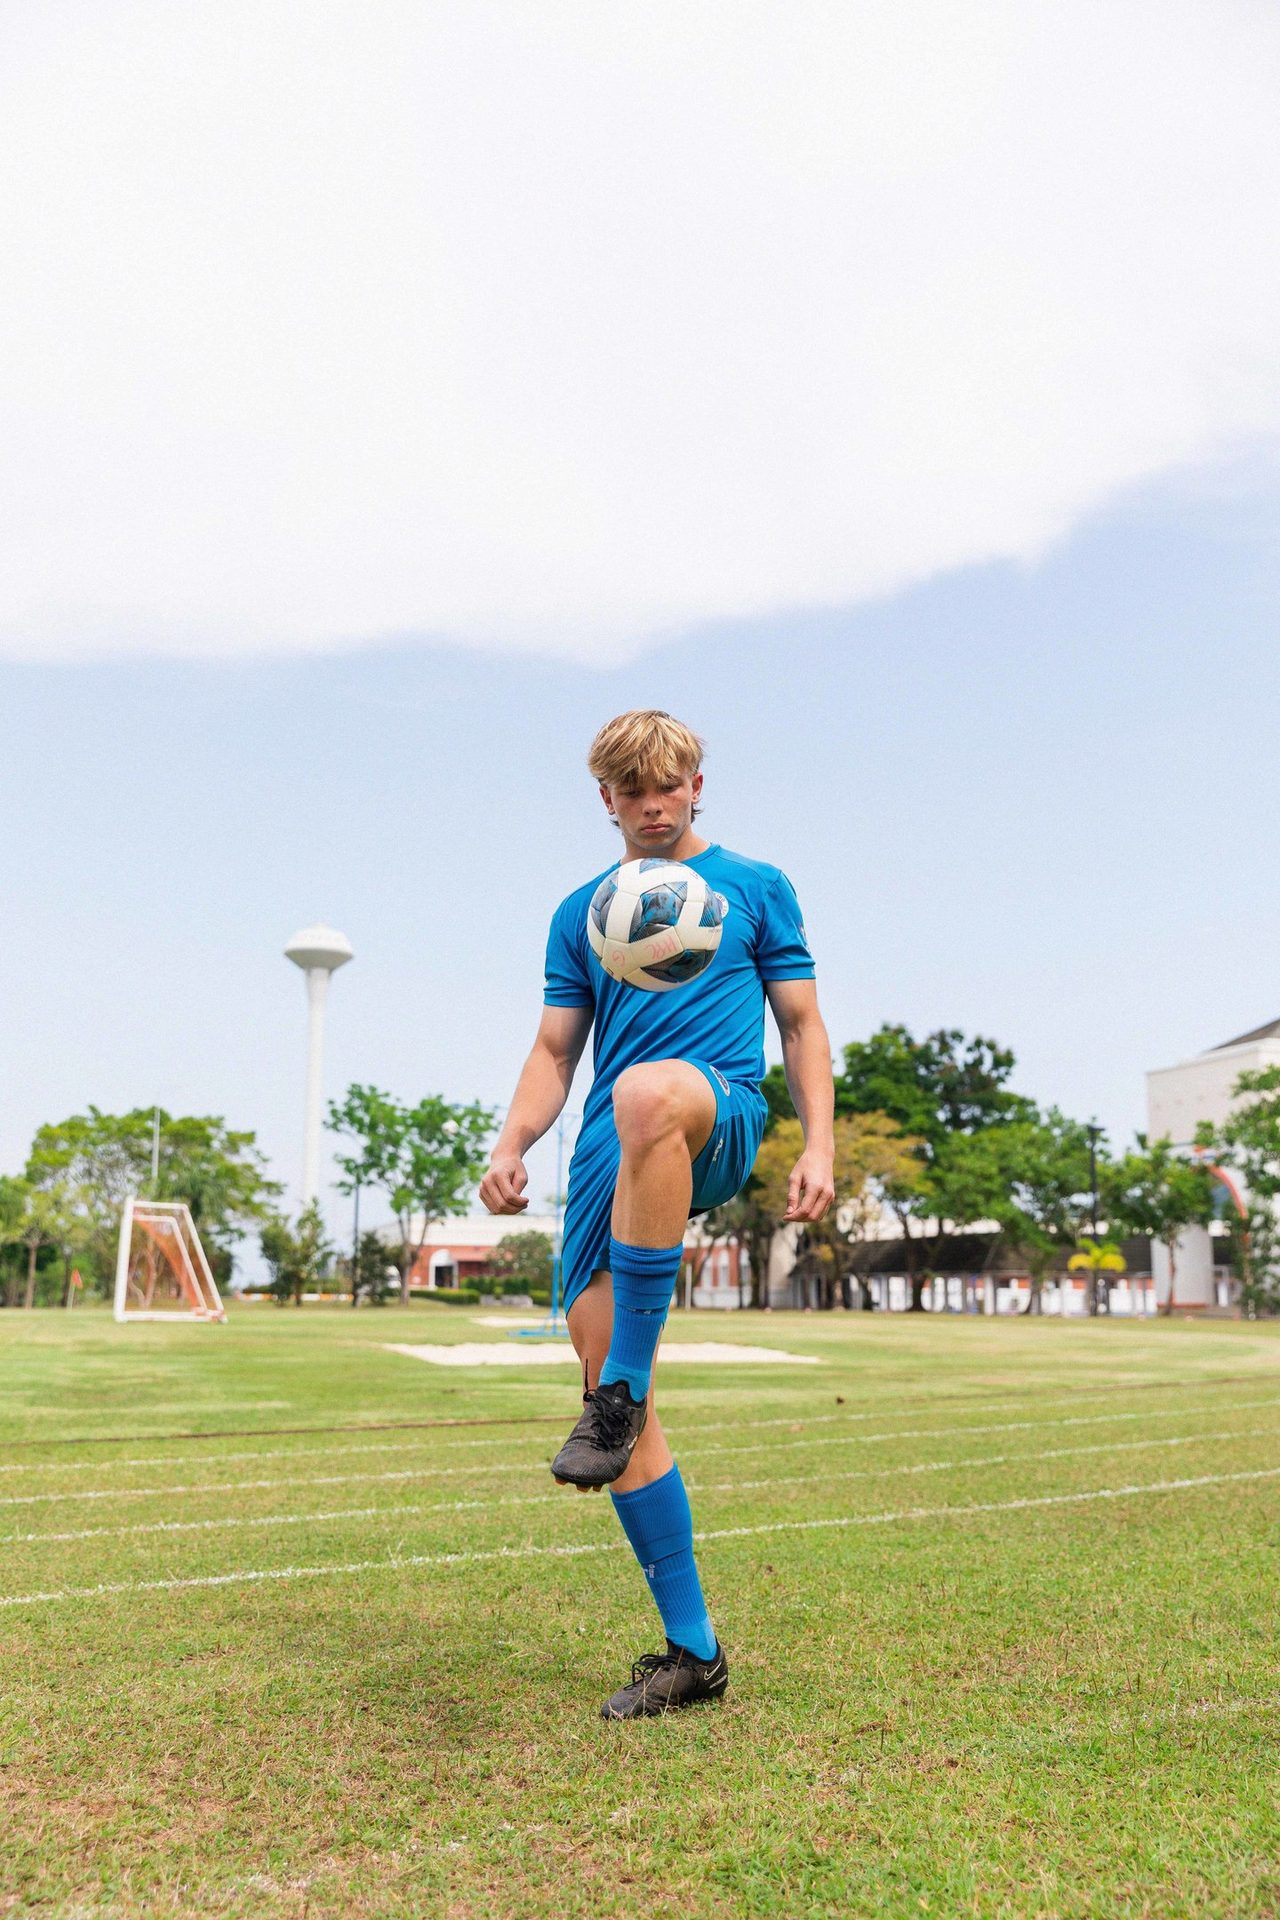 People in nature, Sports uniform, Sky, Plant, Shorts, Cloud, Tree, Football, Ball